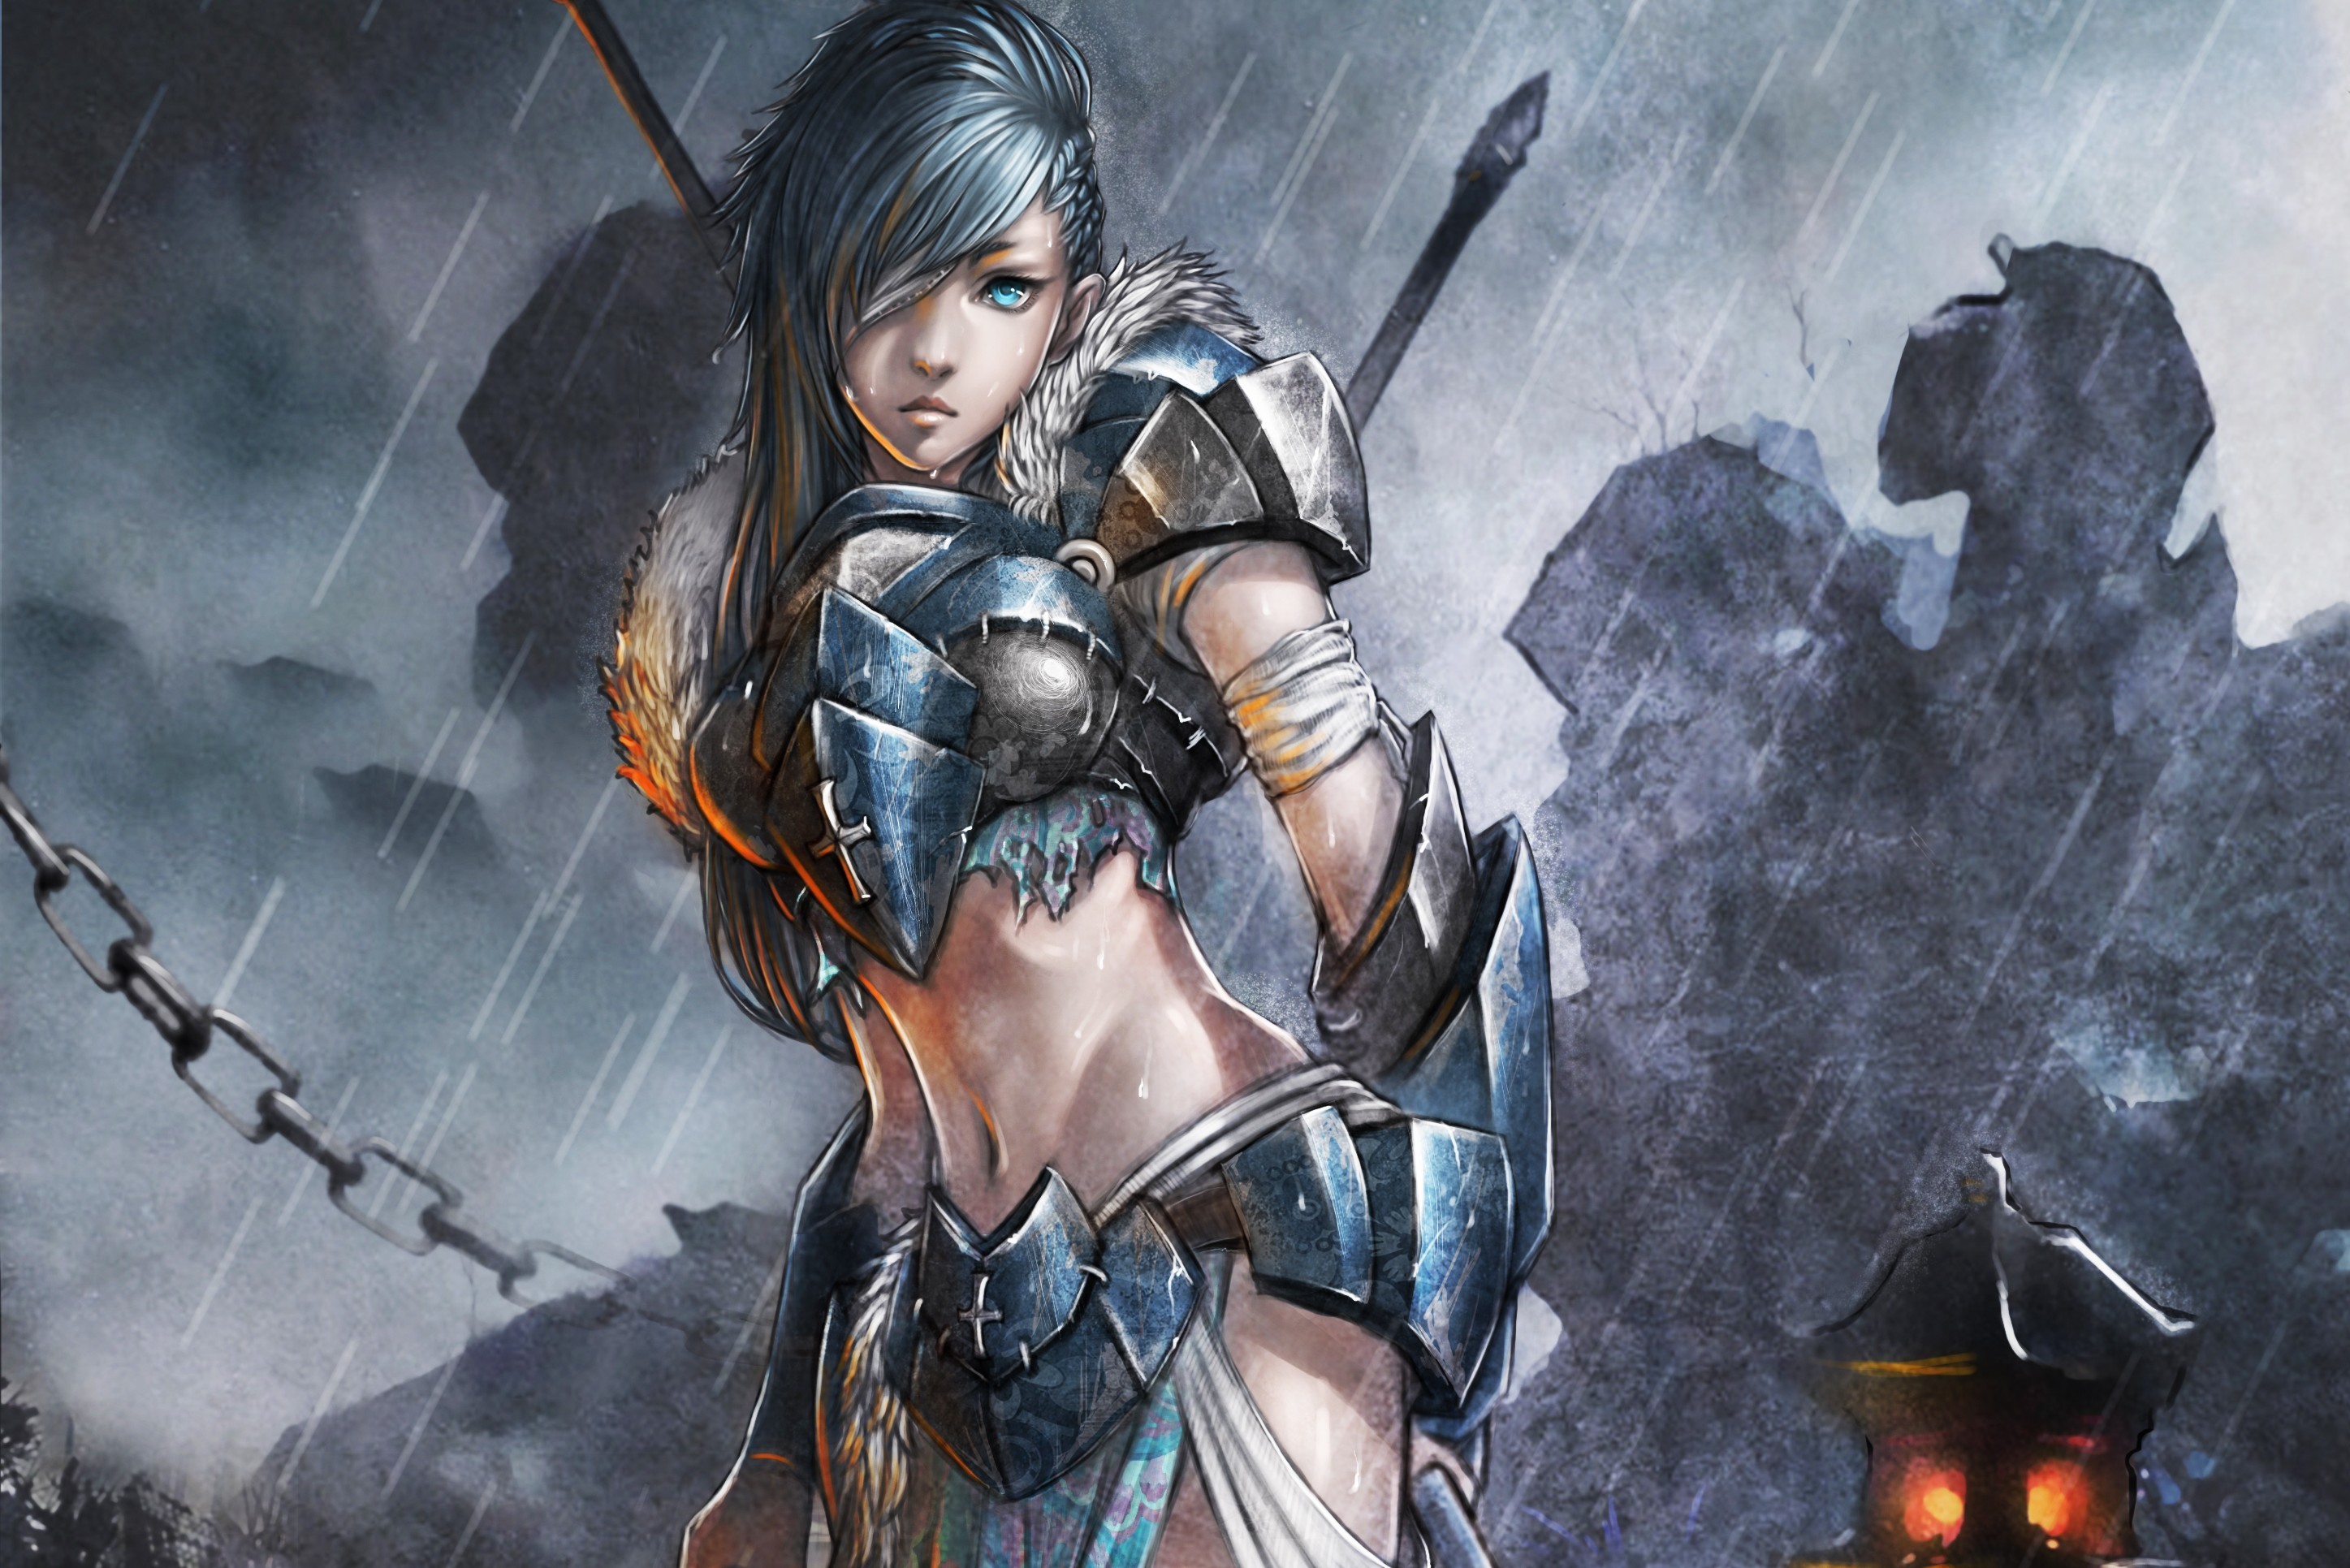 female warrior wallpaper,action adventure game,cg artwork,pc game,games,strategy video game